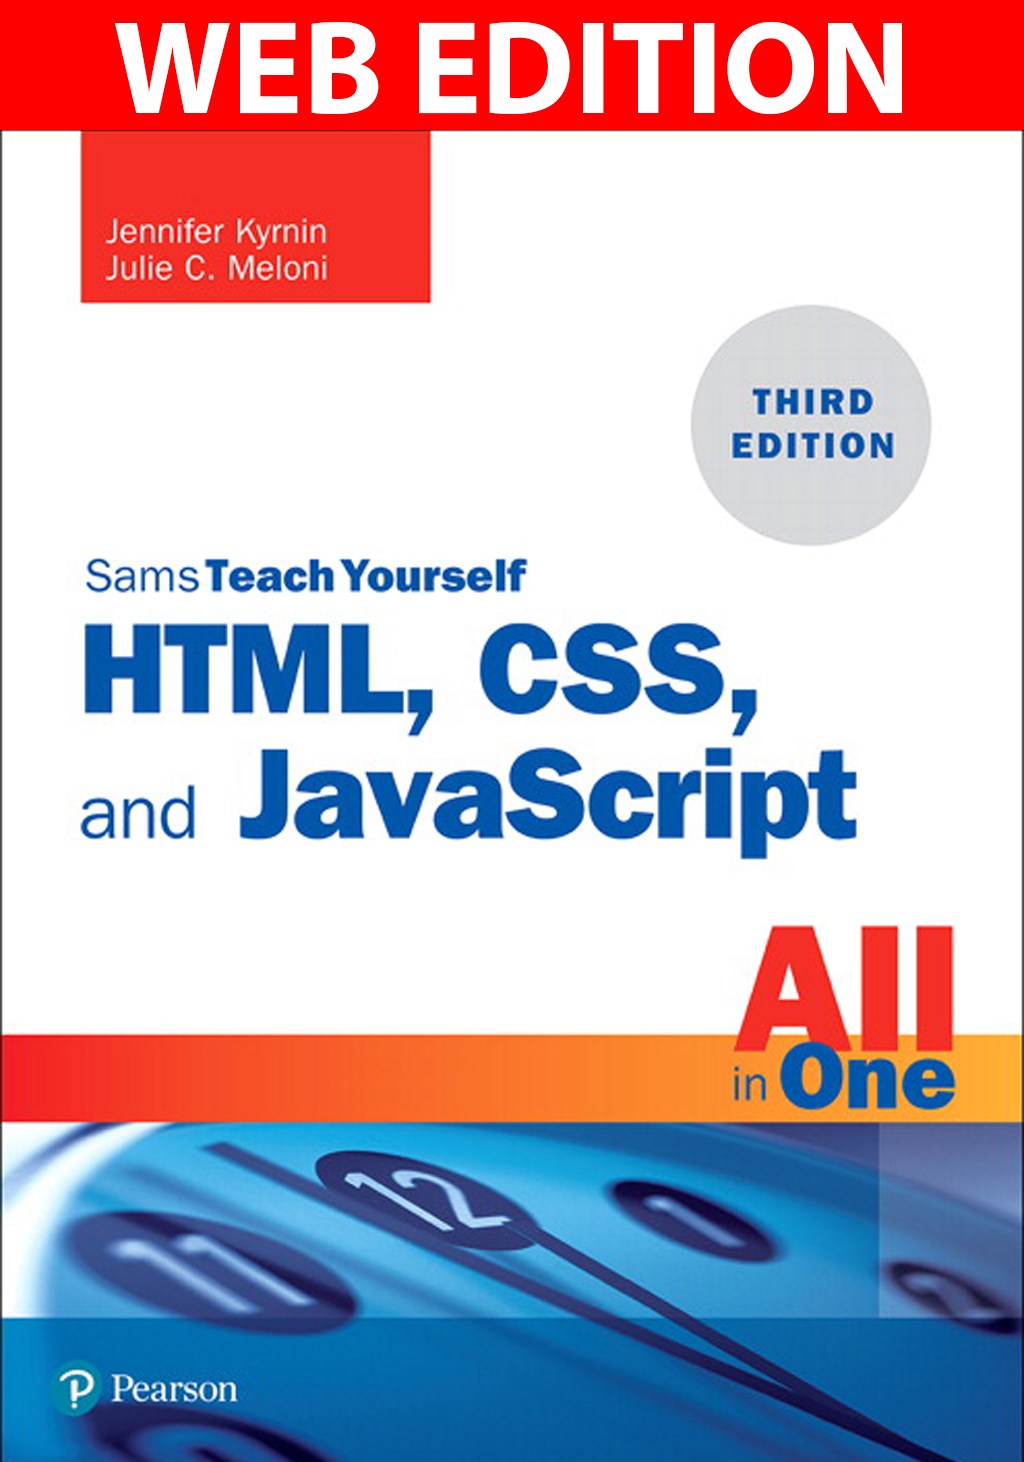 HTML, CSS, and JavaScript All in One: Covering HTML5, CSS3, and ES6, Sams Teach Yourself, Web Edition, 3rd Edition